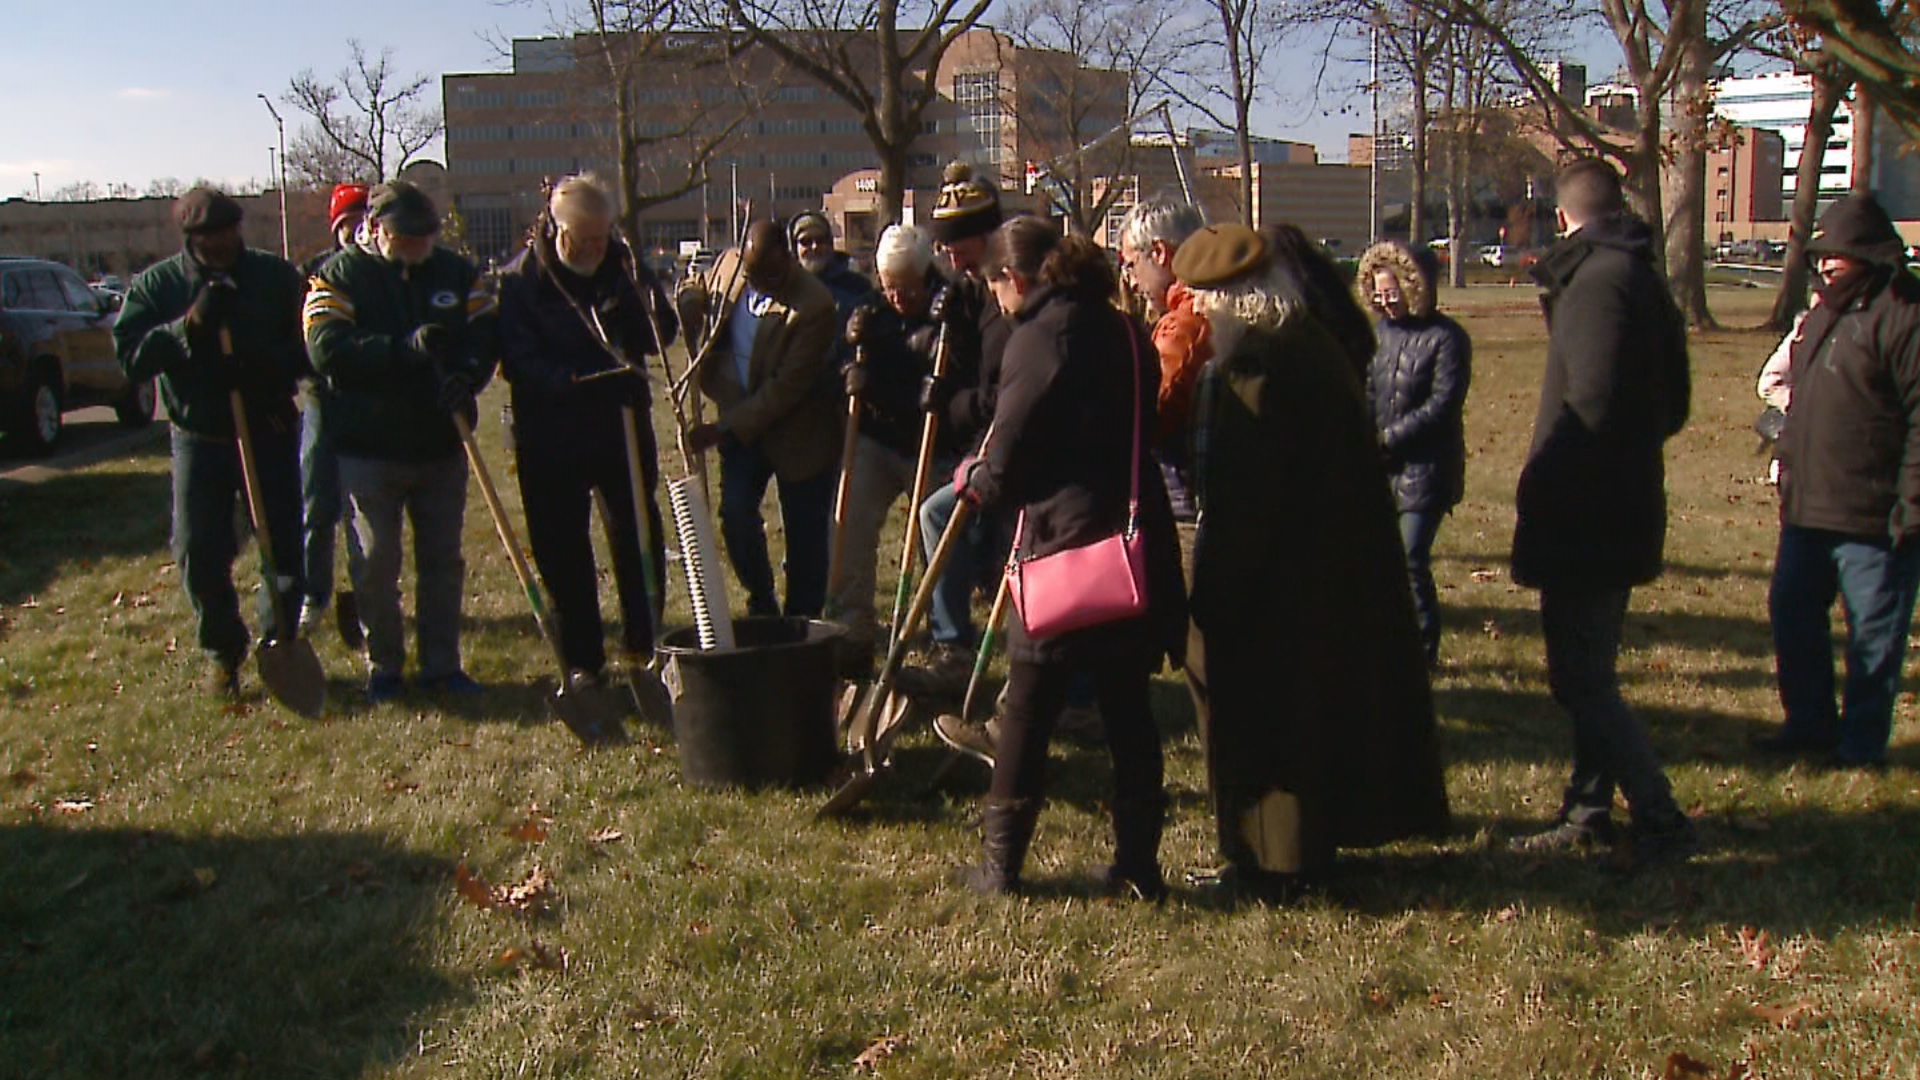 Faith leaders gather to plant tree on Giving Tuesday